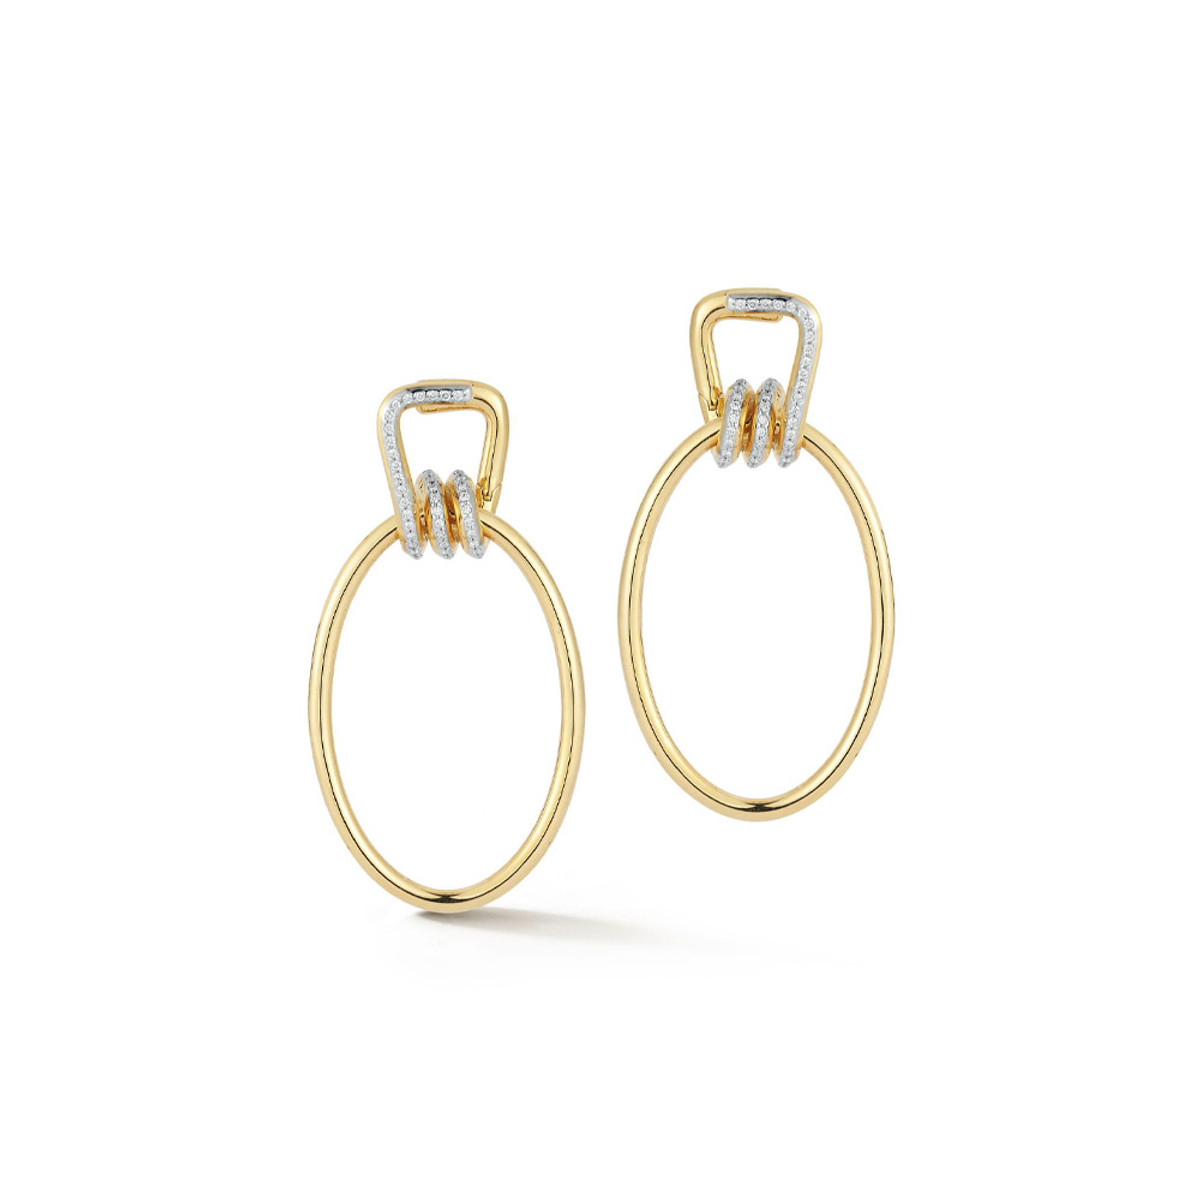 Walters Faith Huxley 18K Yellow Gold and Diamond Coil Link Earrings-56193 Product Image